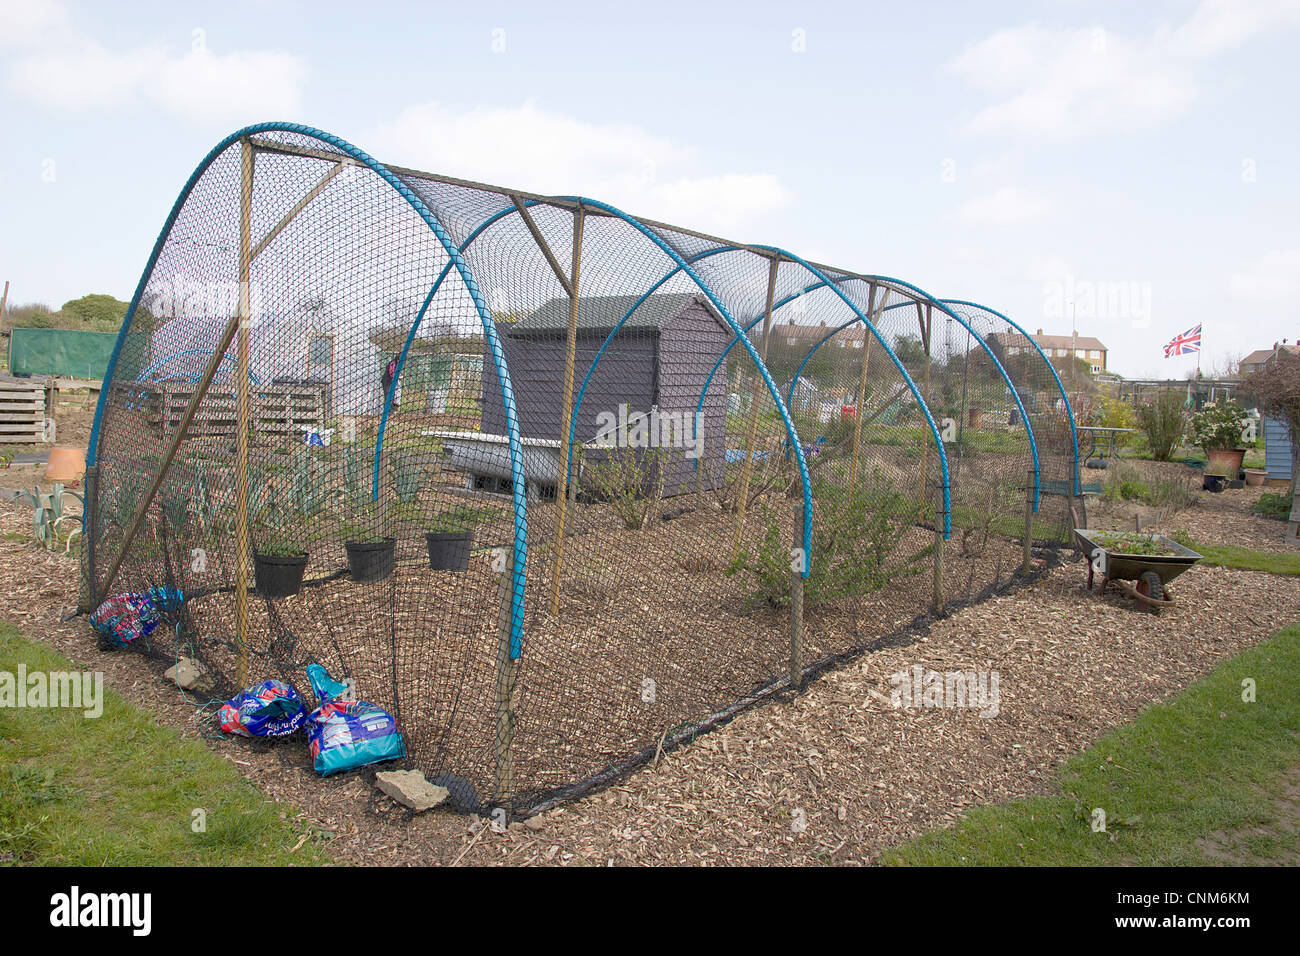 Allotment fruit cage. Grown your own summer fruit.  Home made structure using recycled materials for the frame. Stock Photo